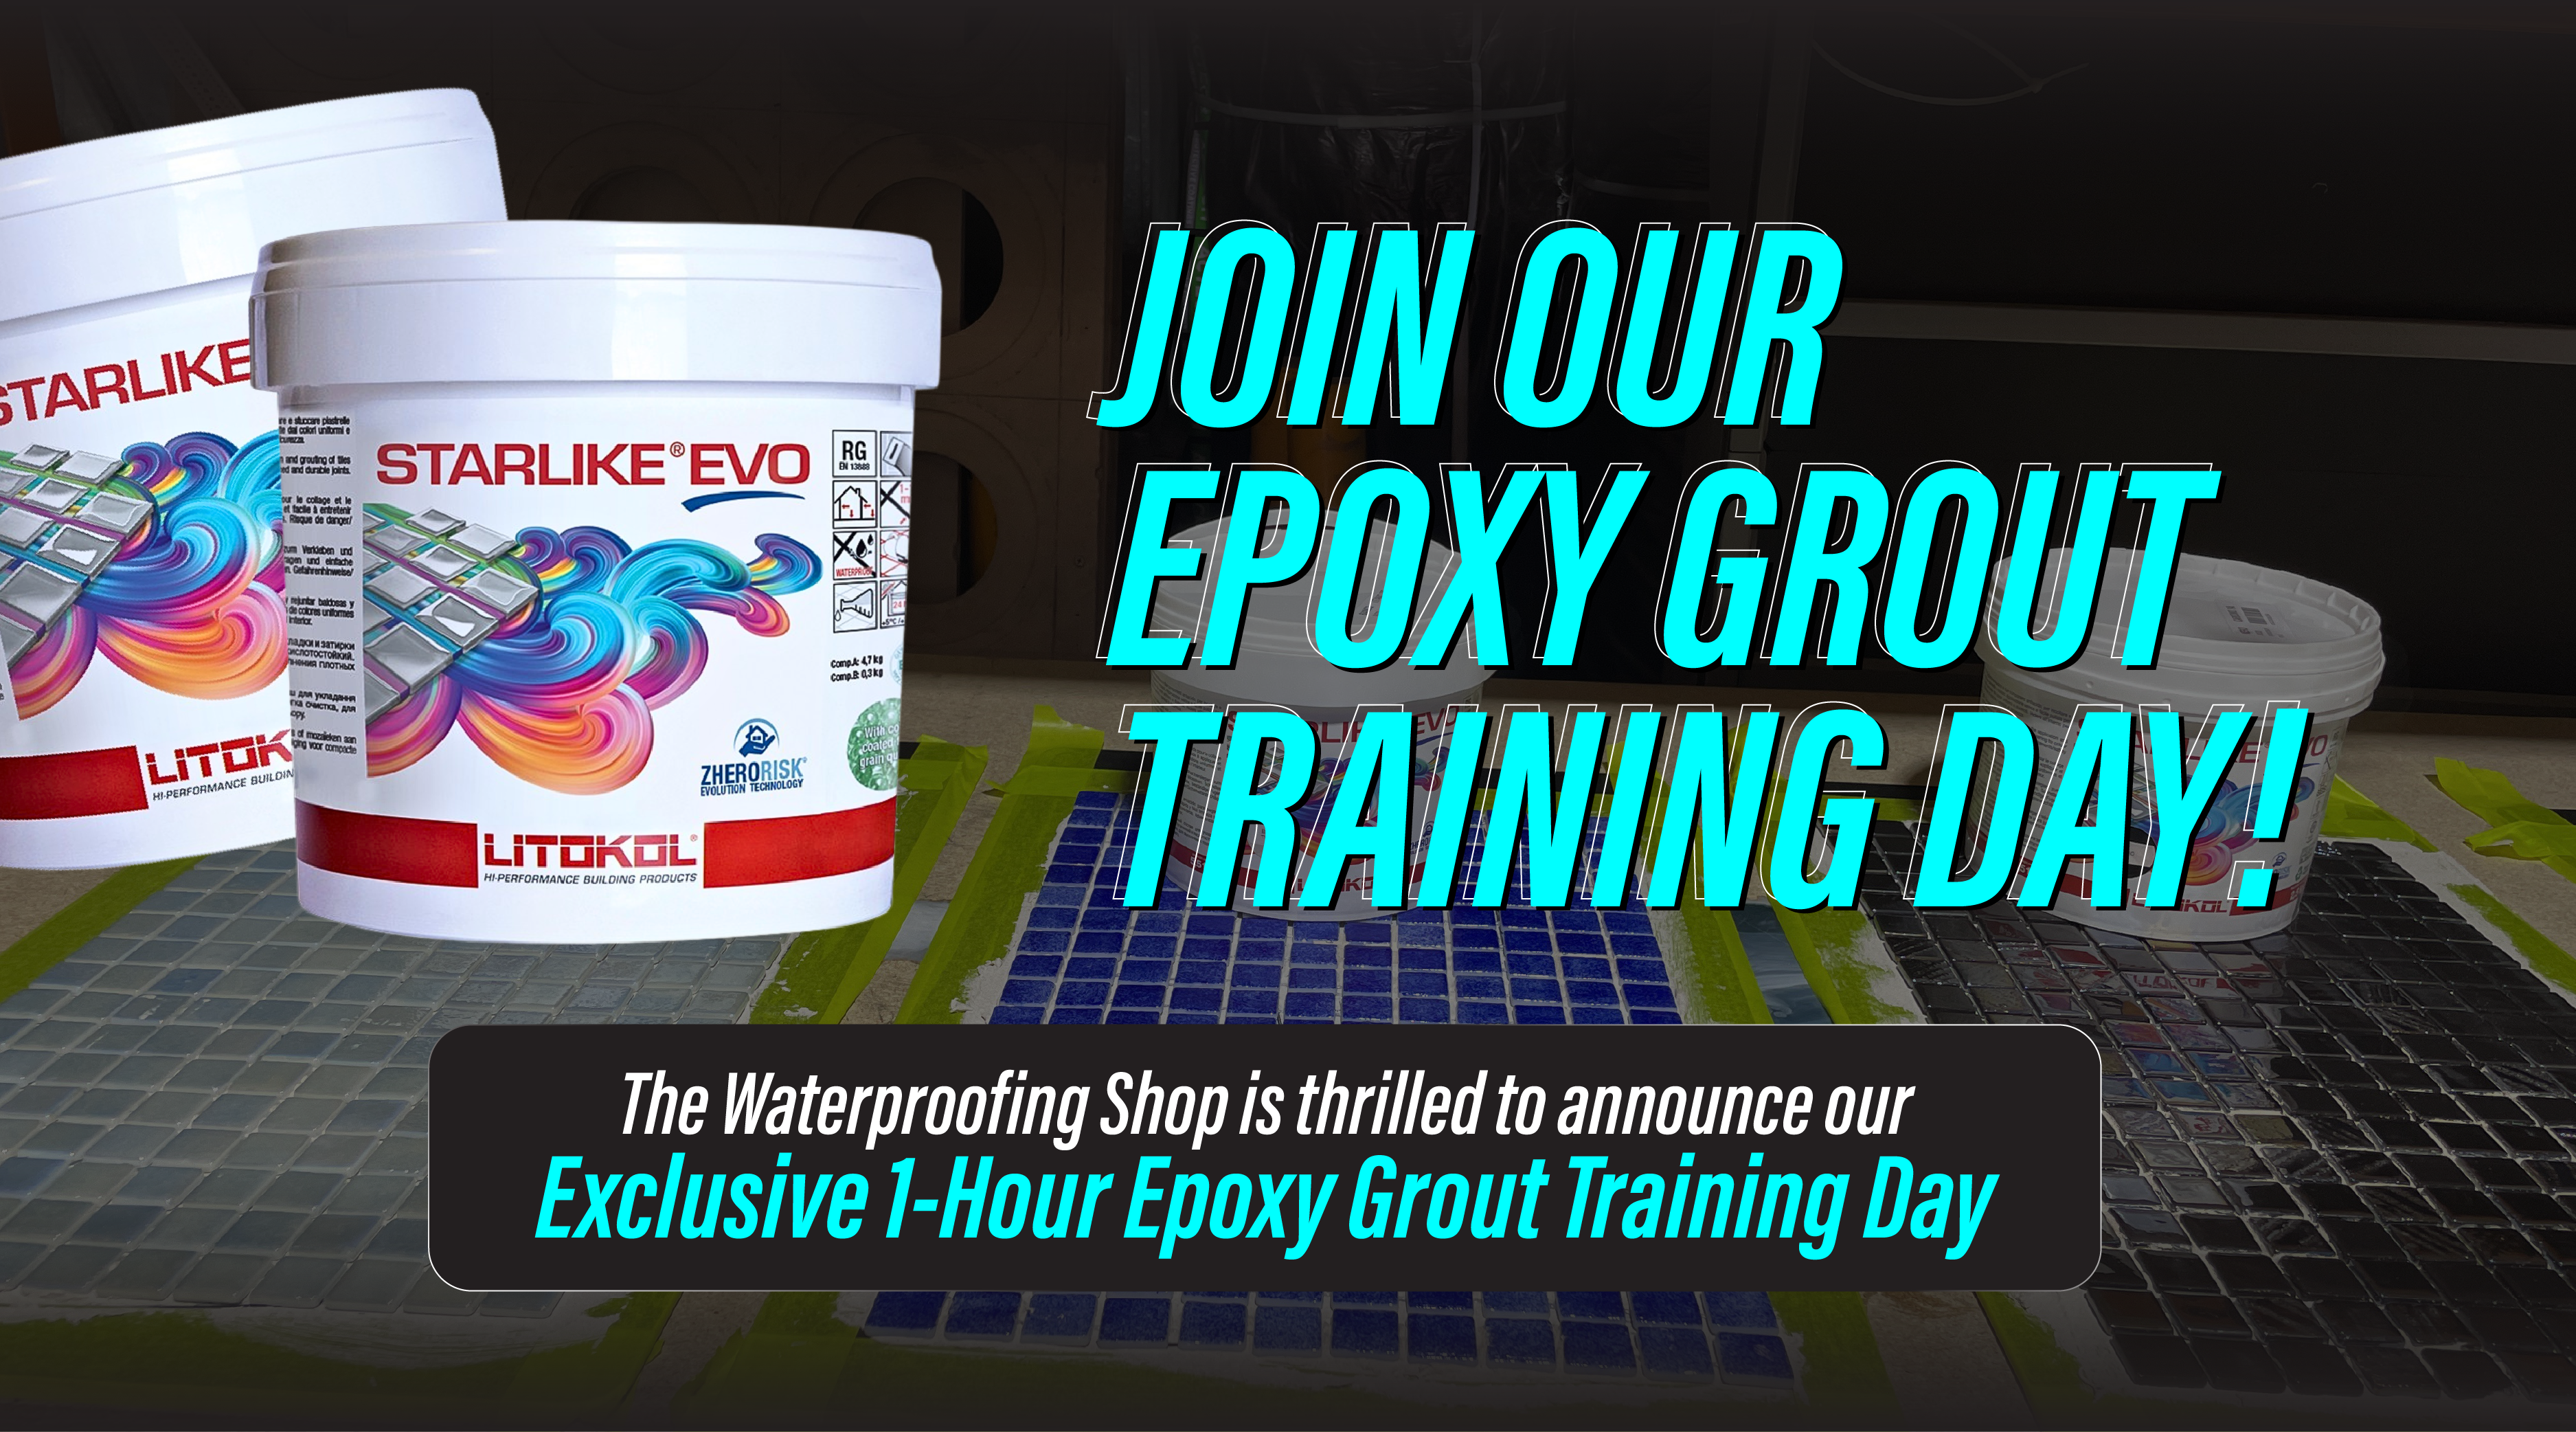 Master Epoxy Grout with Our Exclusive Training Day at The Waterproofing Shop!